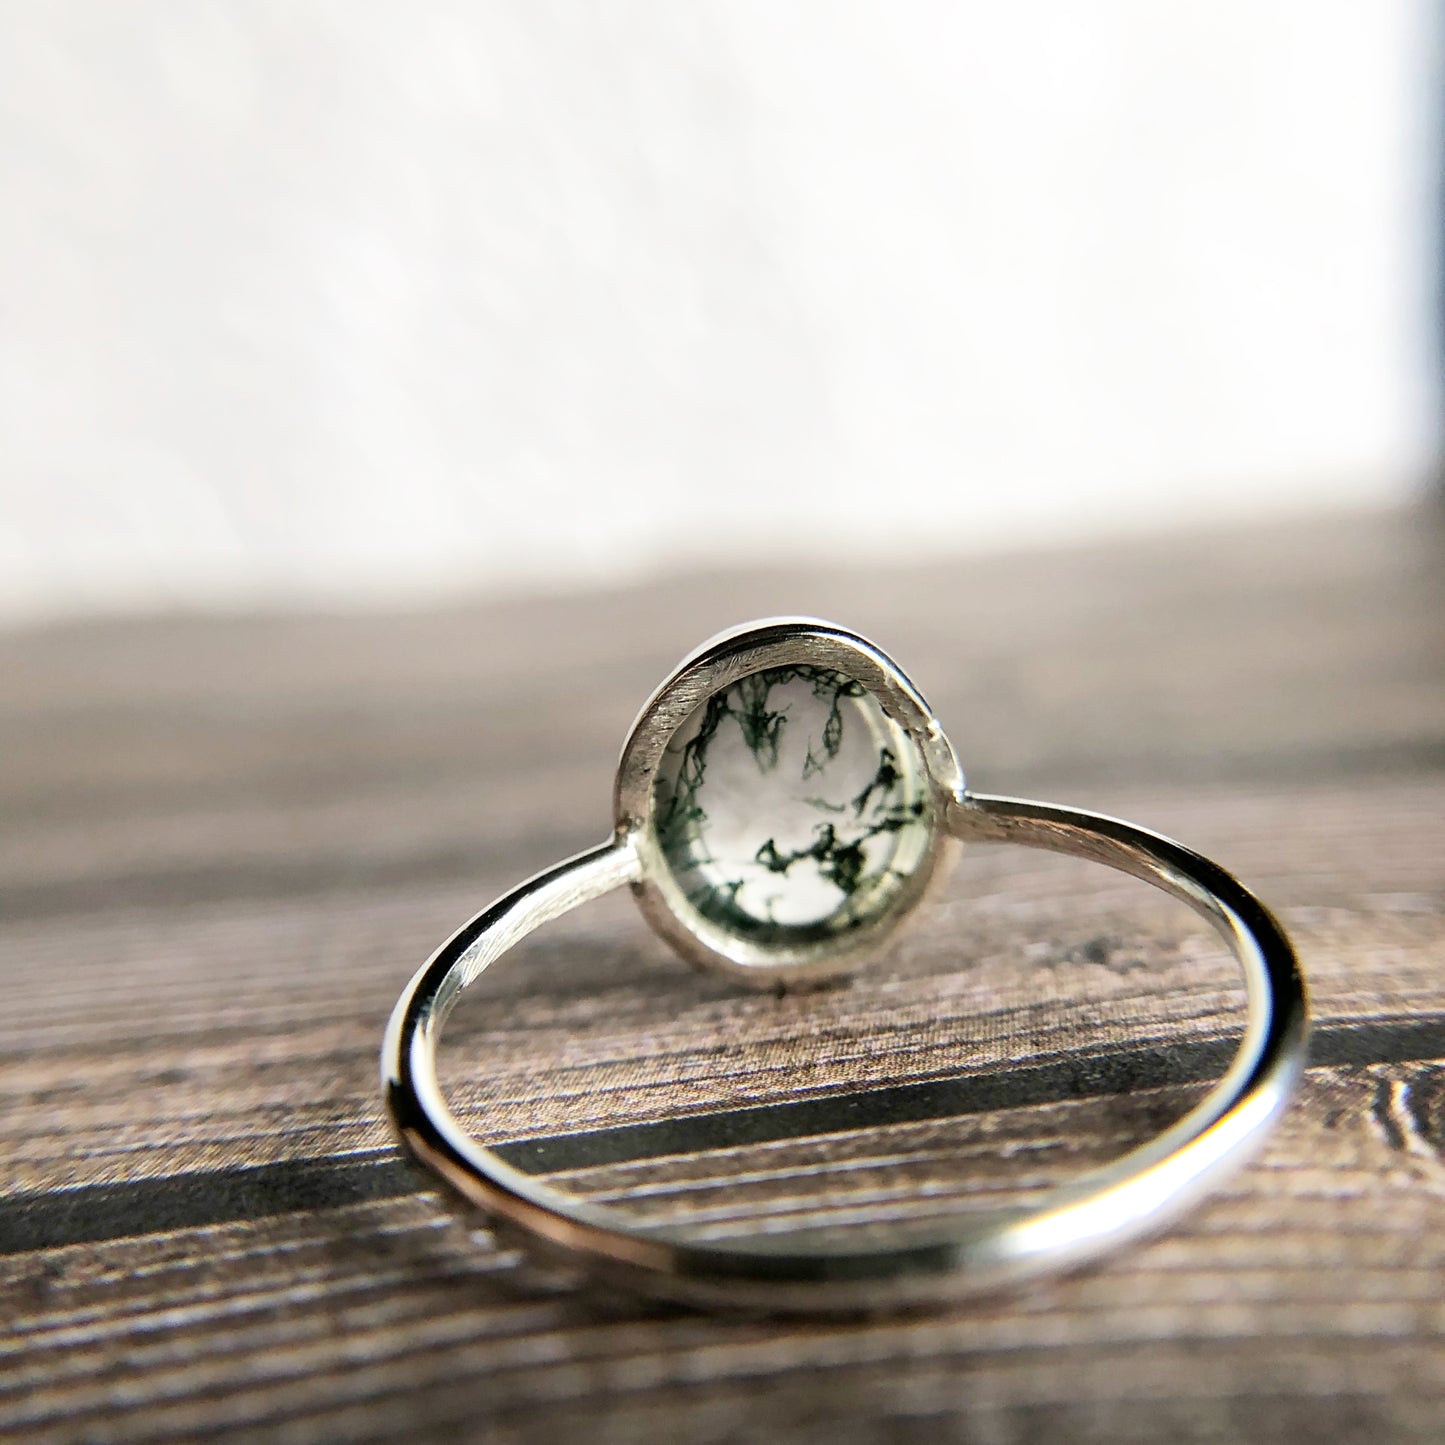 Tiny dots of moss surrounded in quartz, open back bezel with simple silver band